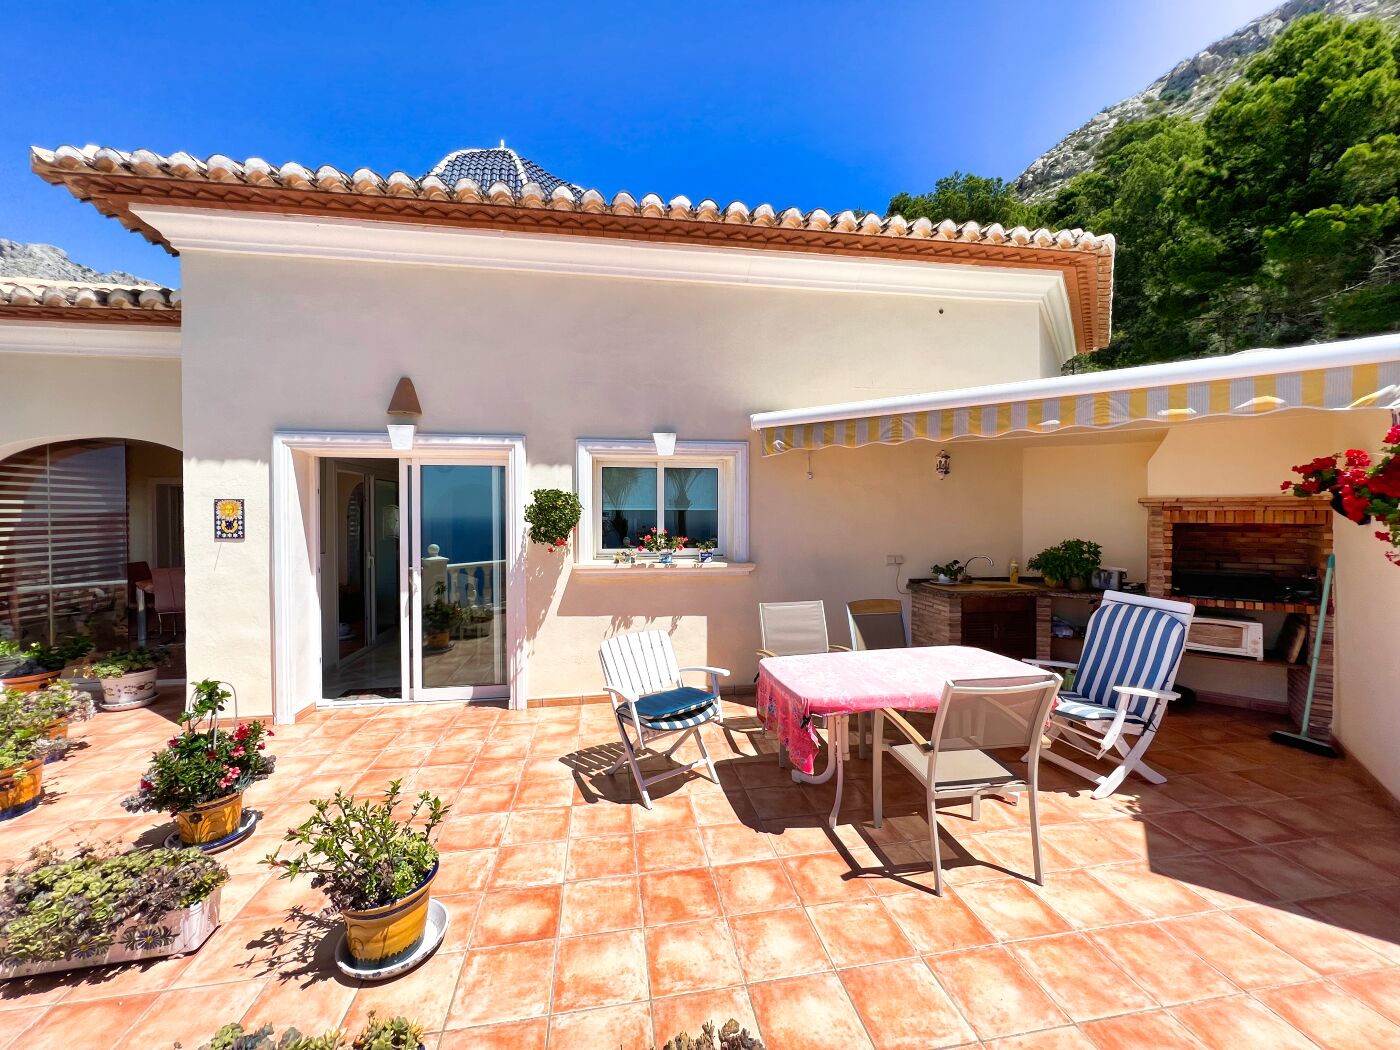 Villa with lovely garden and beautiful sea views in Altea Hills!